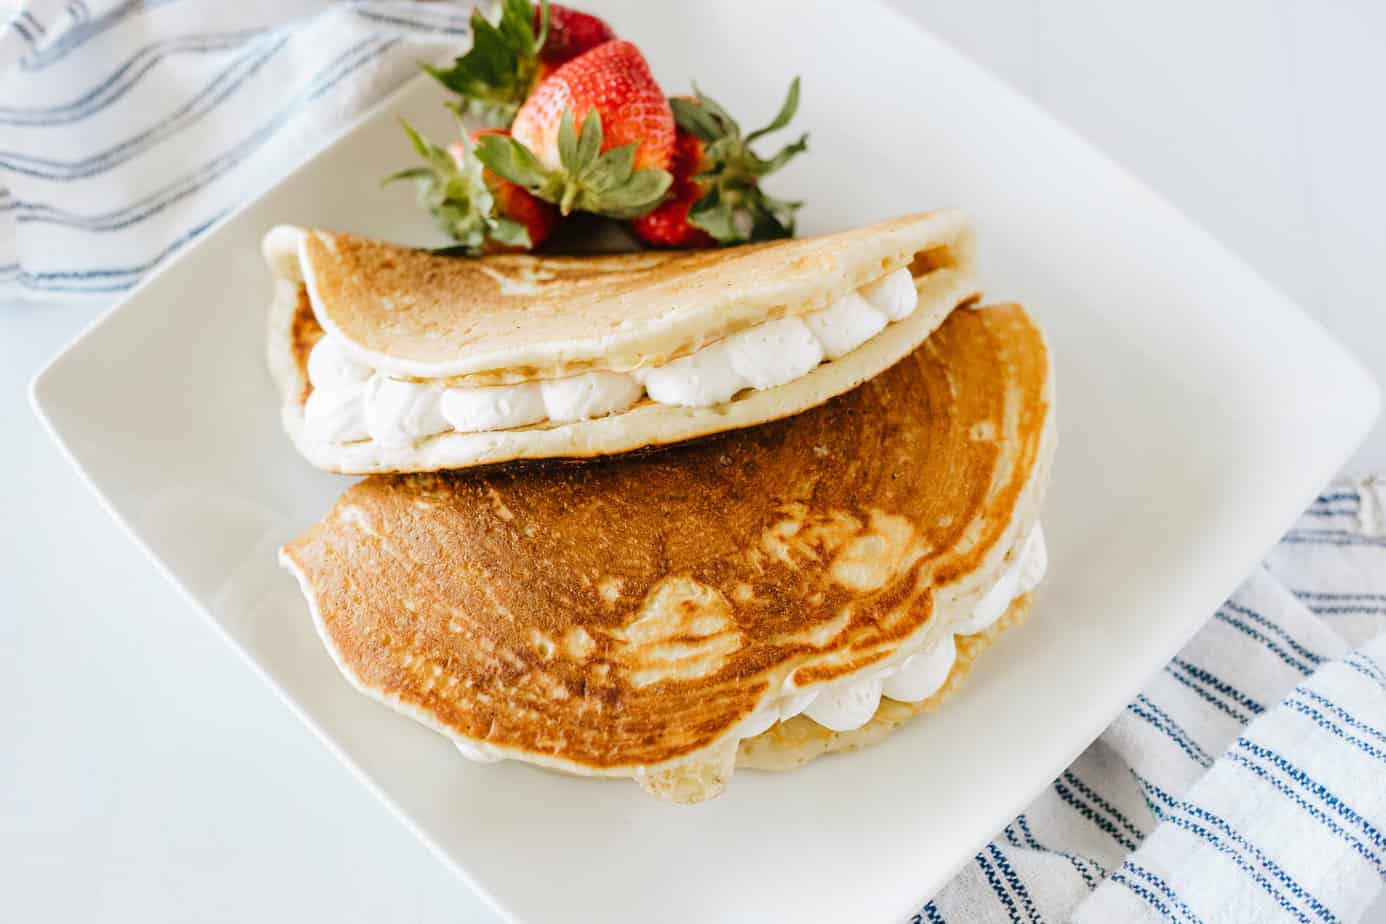 two buttermilk pancakes stuffed with no-bake cheesecake filling folded like tacos on a white plate with fresh strawberries